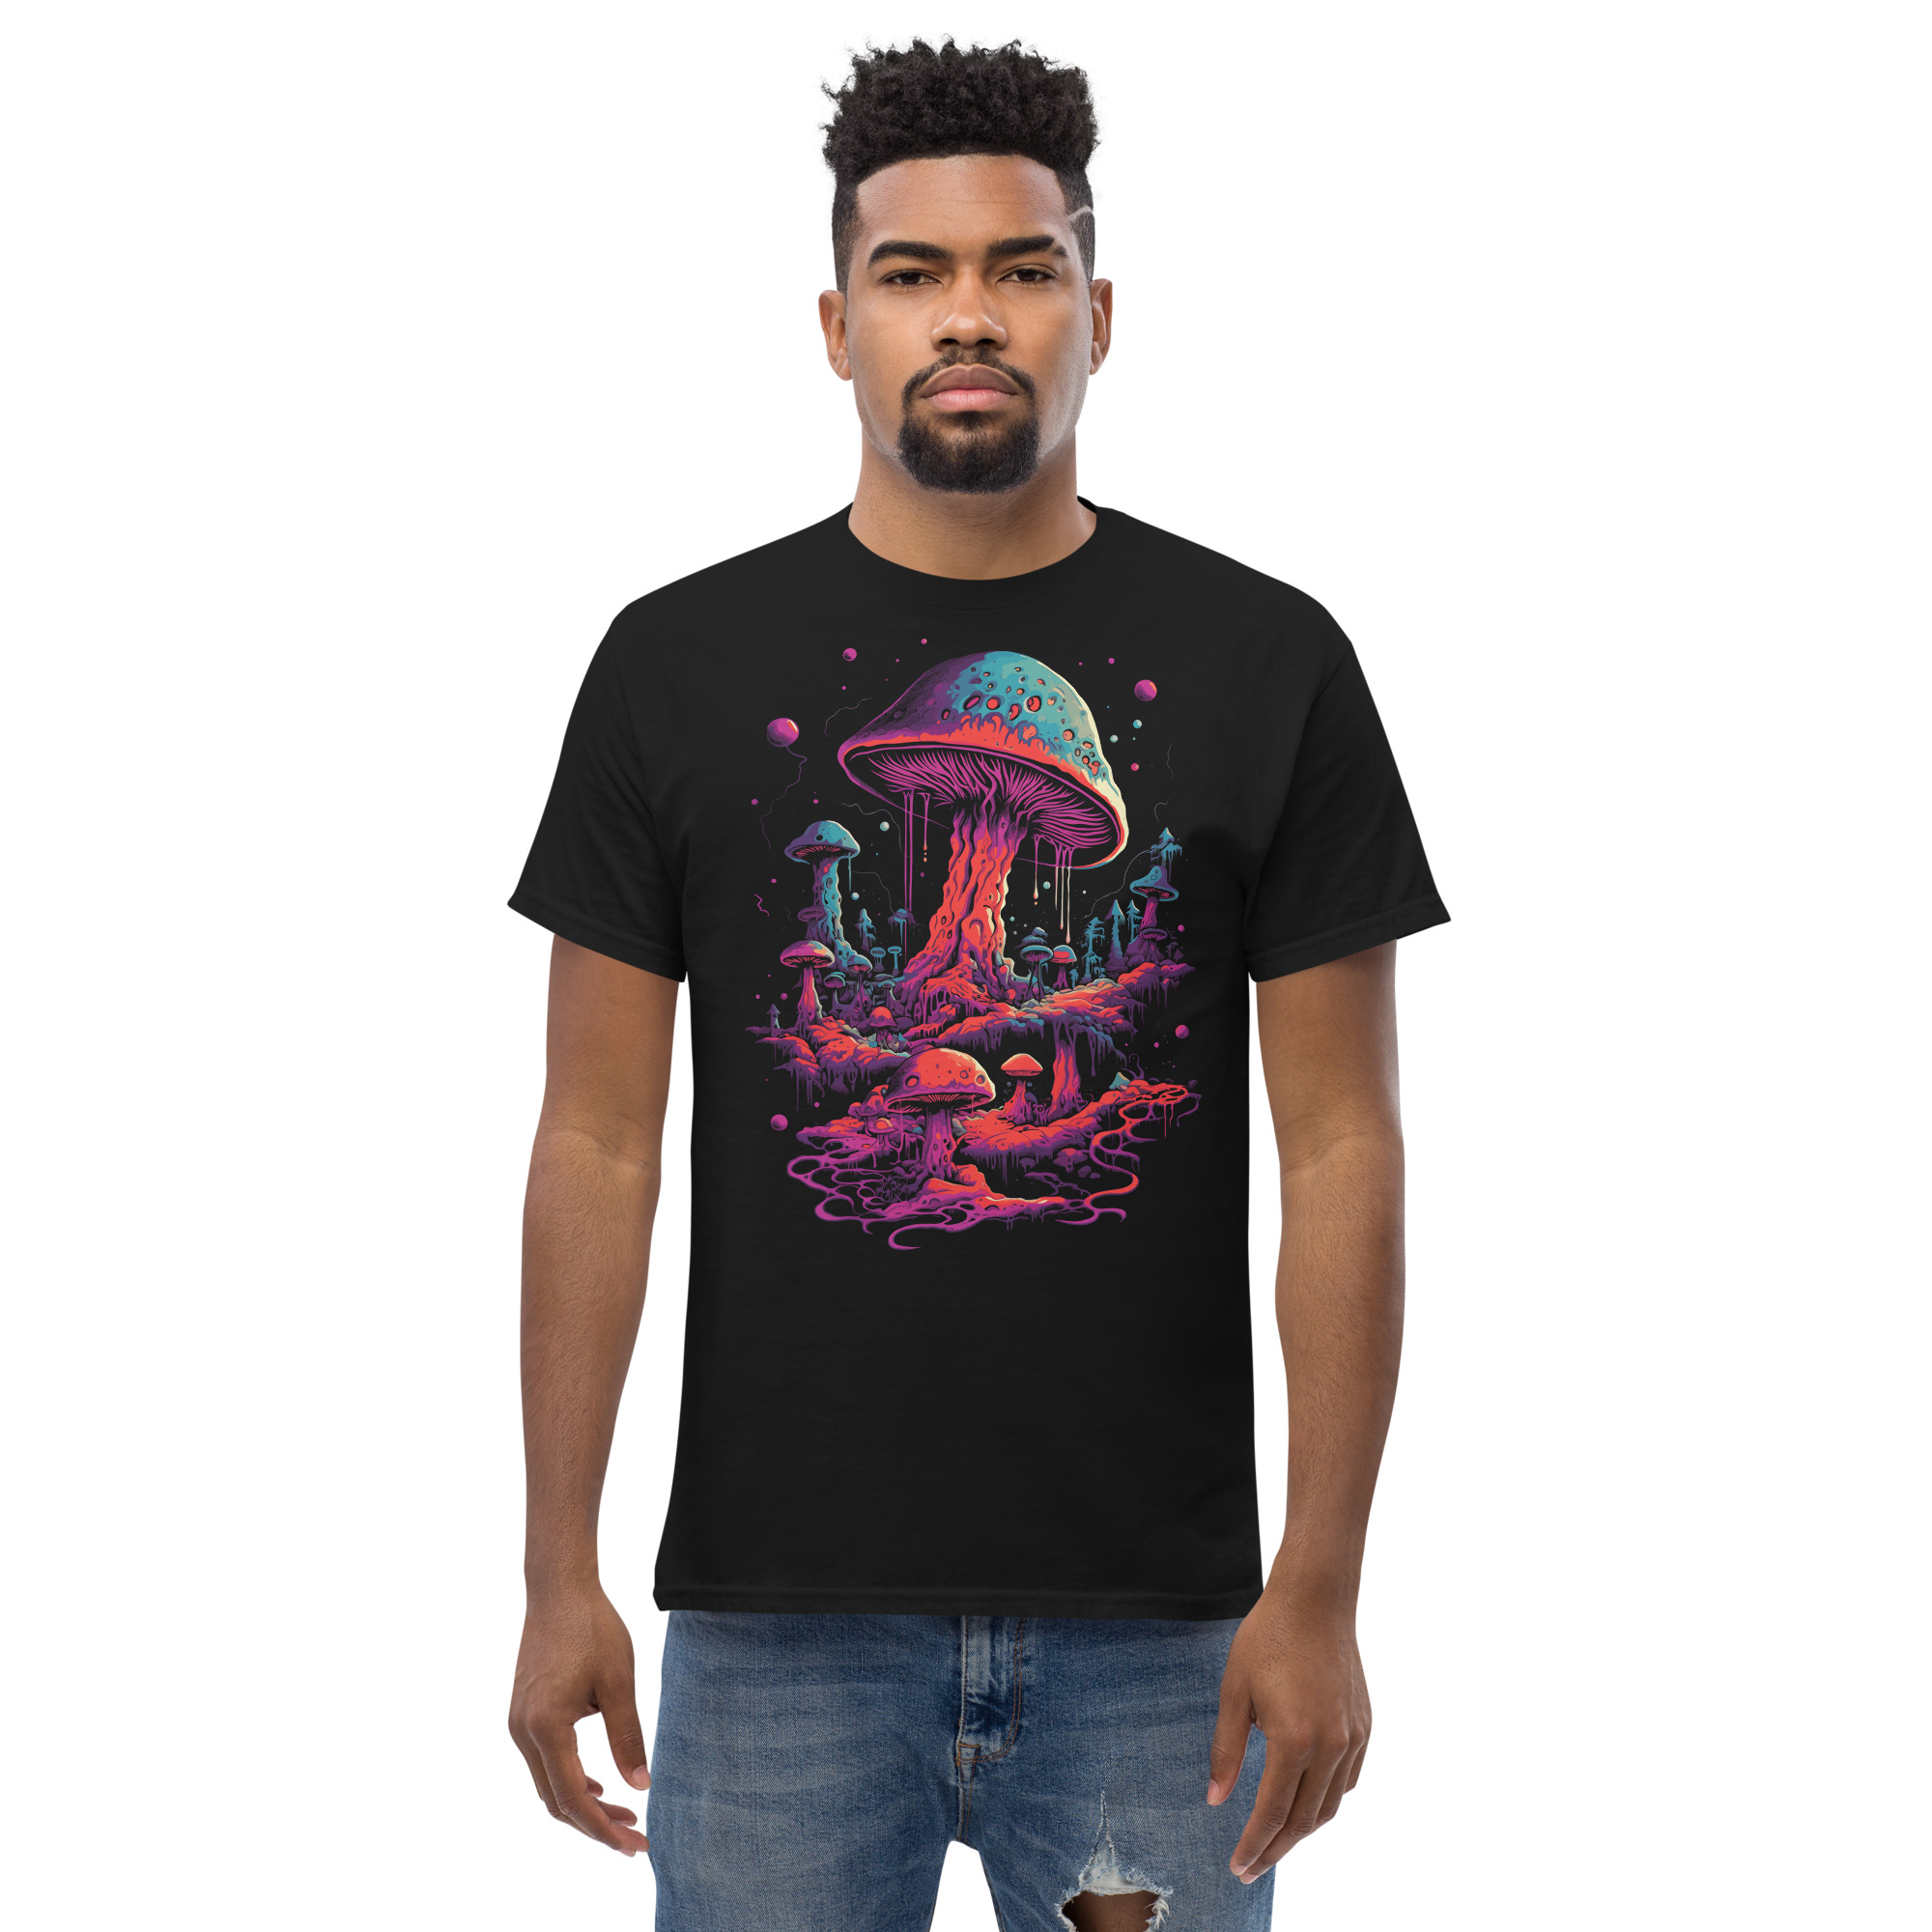 T-shirt – Psychedelic – Trippy Mushrooms Men's Clothing Wearyt